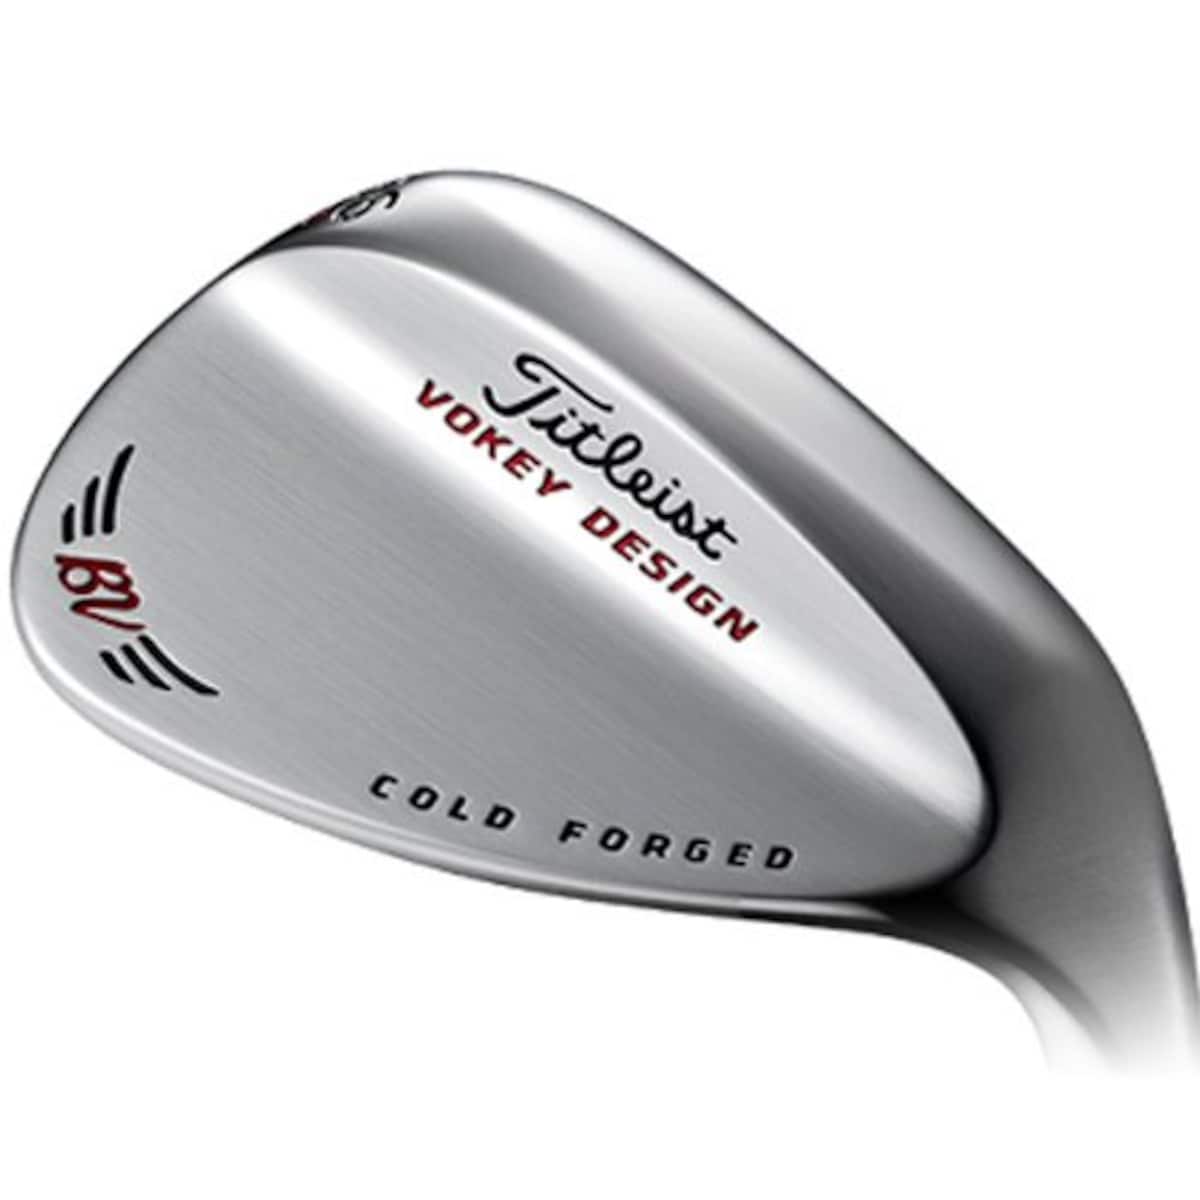 TITLEIST(タイトリスト) VOKEY DESIGN COLD FORGED WEDGE NSPRO950GH